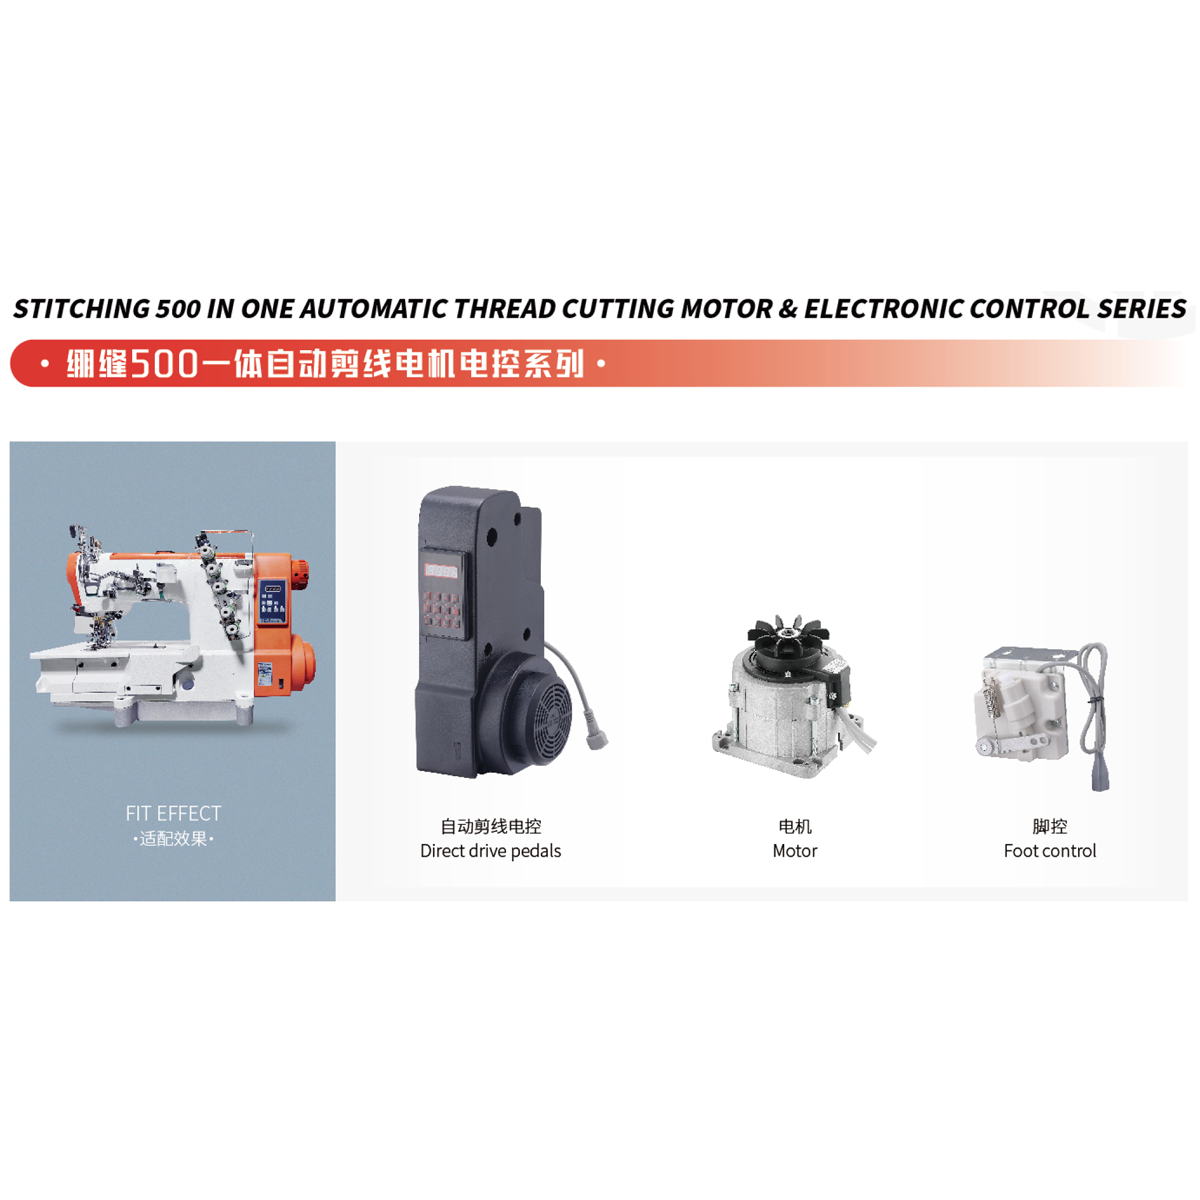 STITCHING 500 IN ONE AUTOMATIC THREAD CUTTING MOTOR & ELECTRONIC CONTROL SERIES